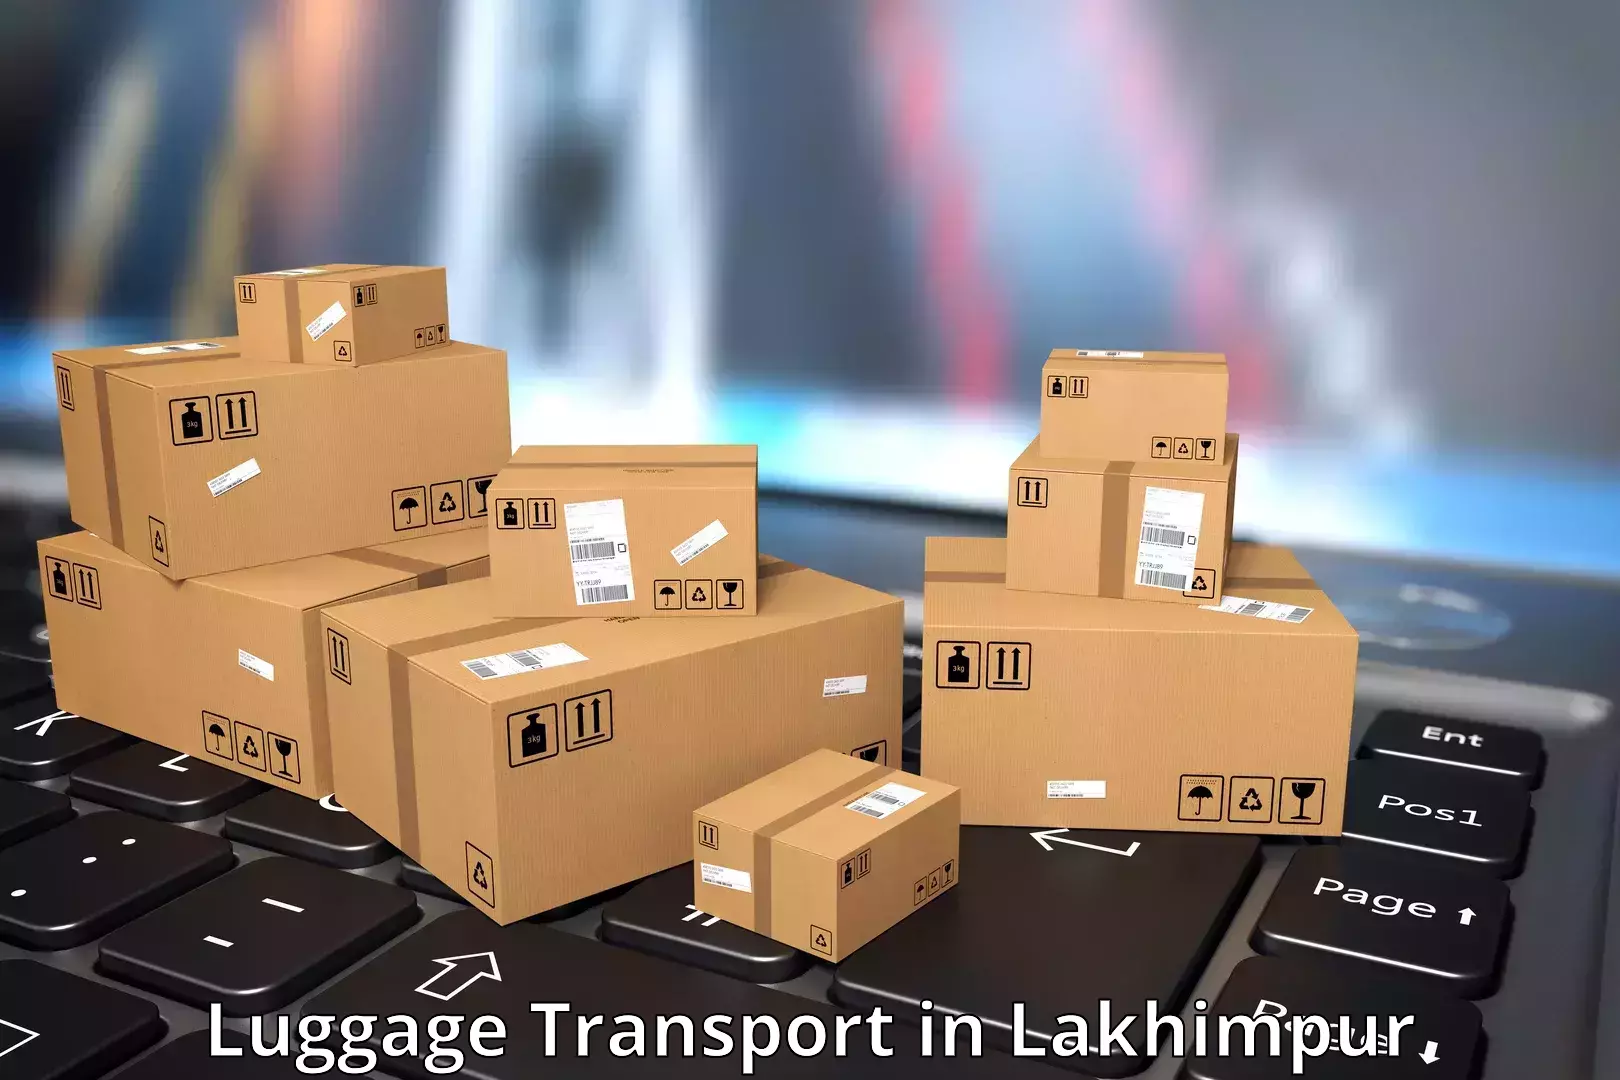 Luggage delivery app in Lakhimpur